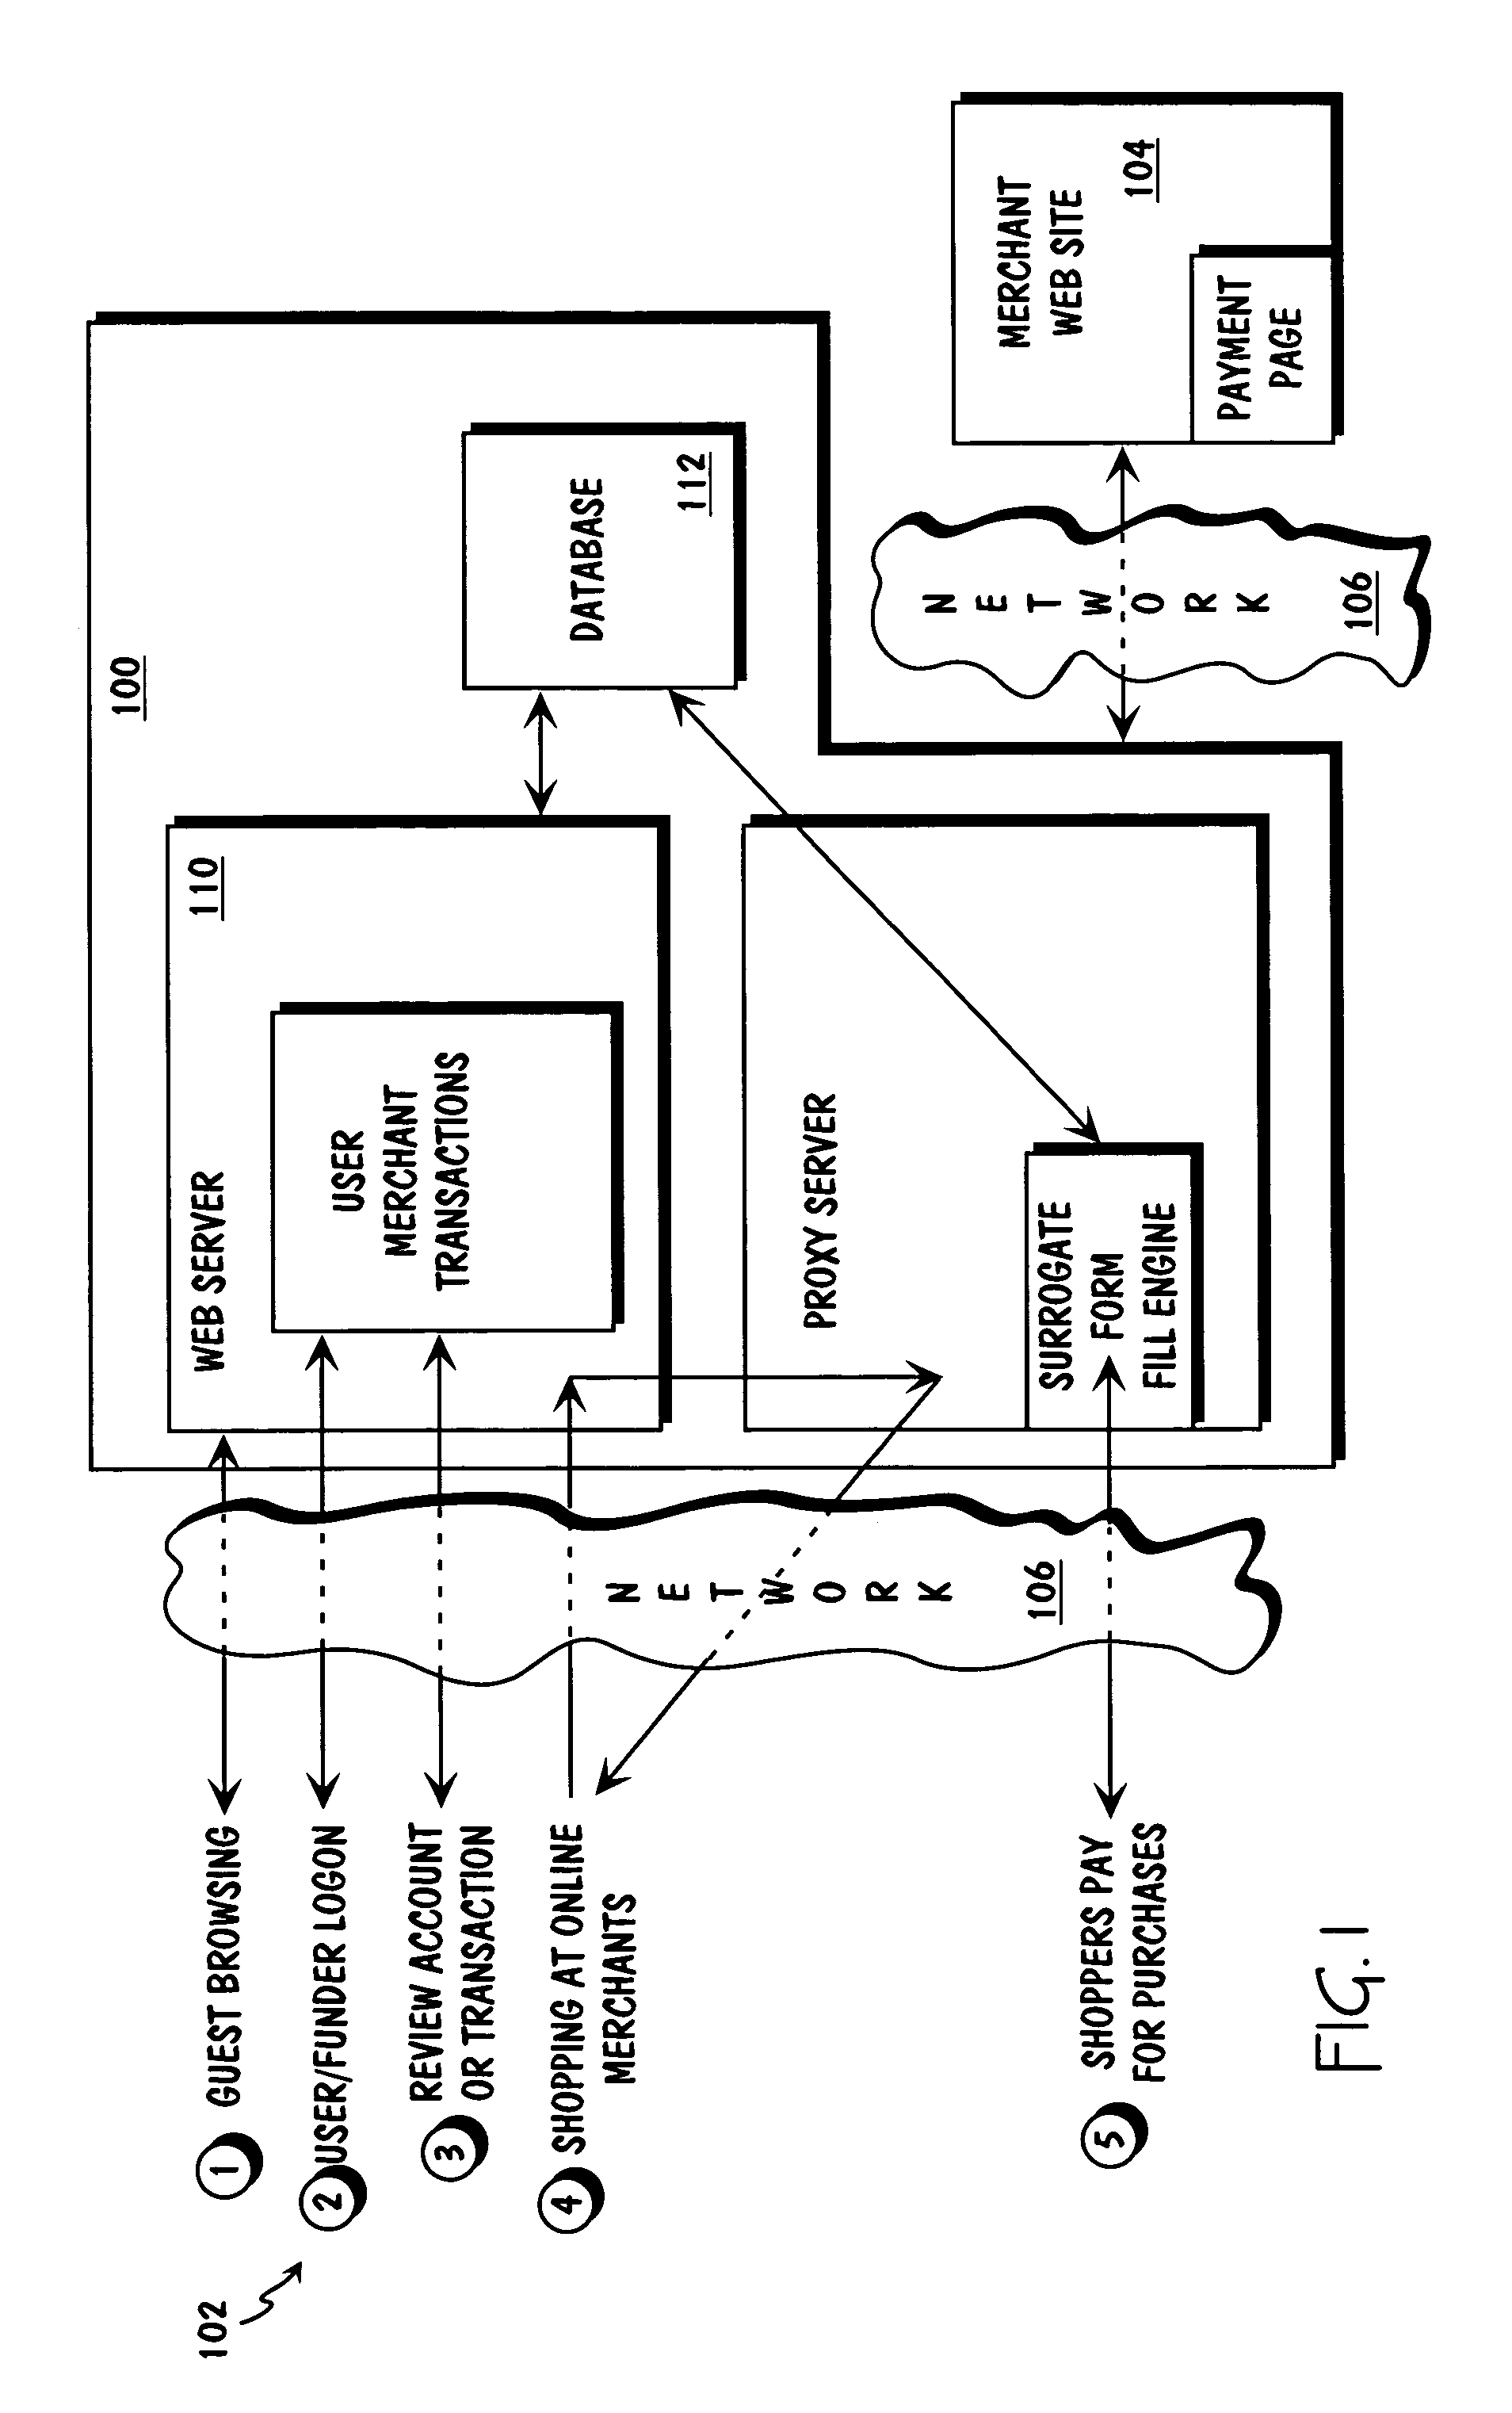 Method and apparatus for surrogate control of network-based electronic transactions